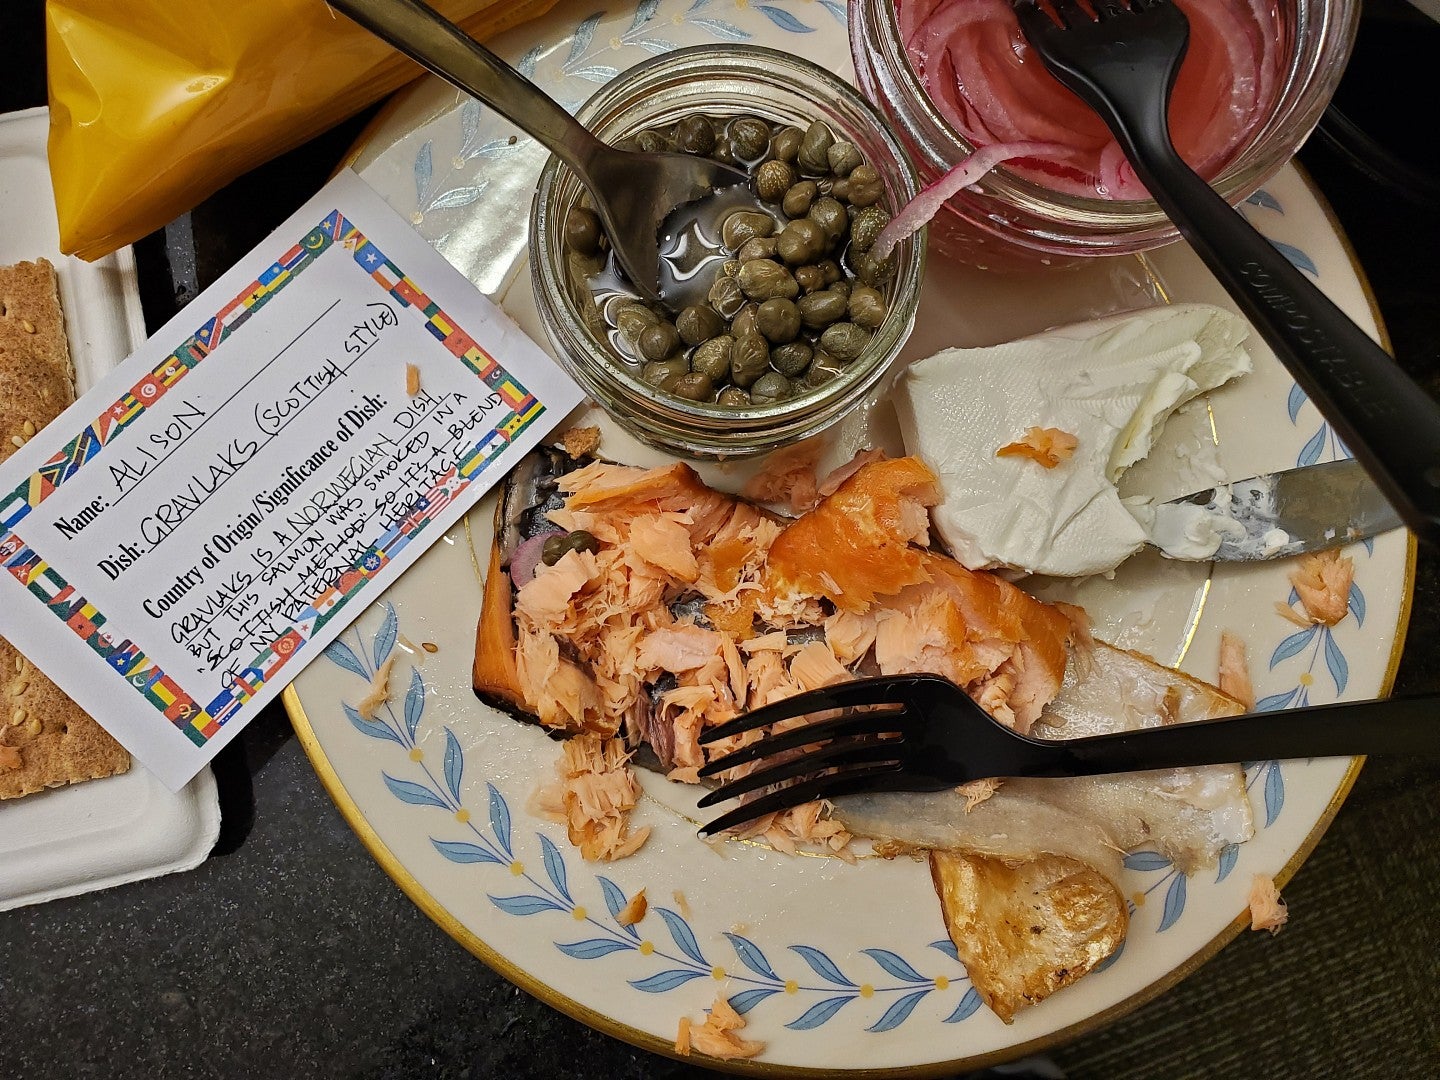 Smoked salmon, capers, cream cheese, and capers by a card that reads "Gravlaks Scottish Style"